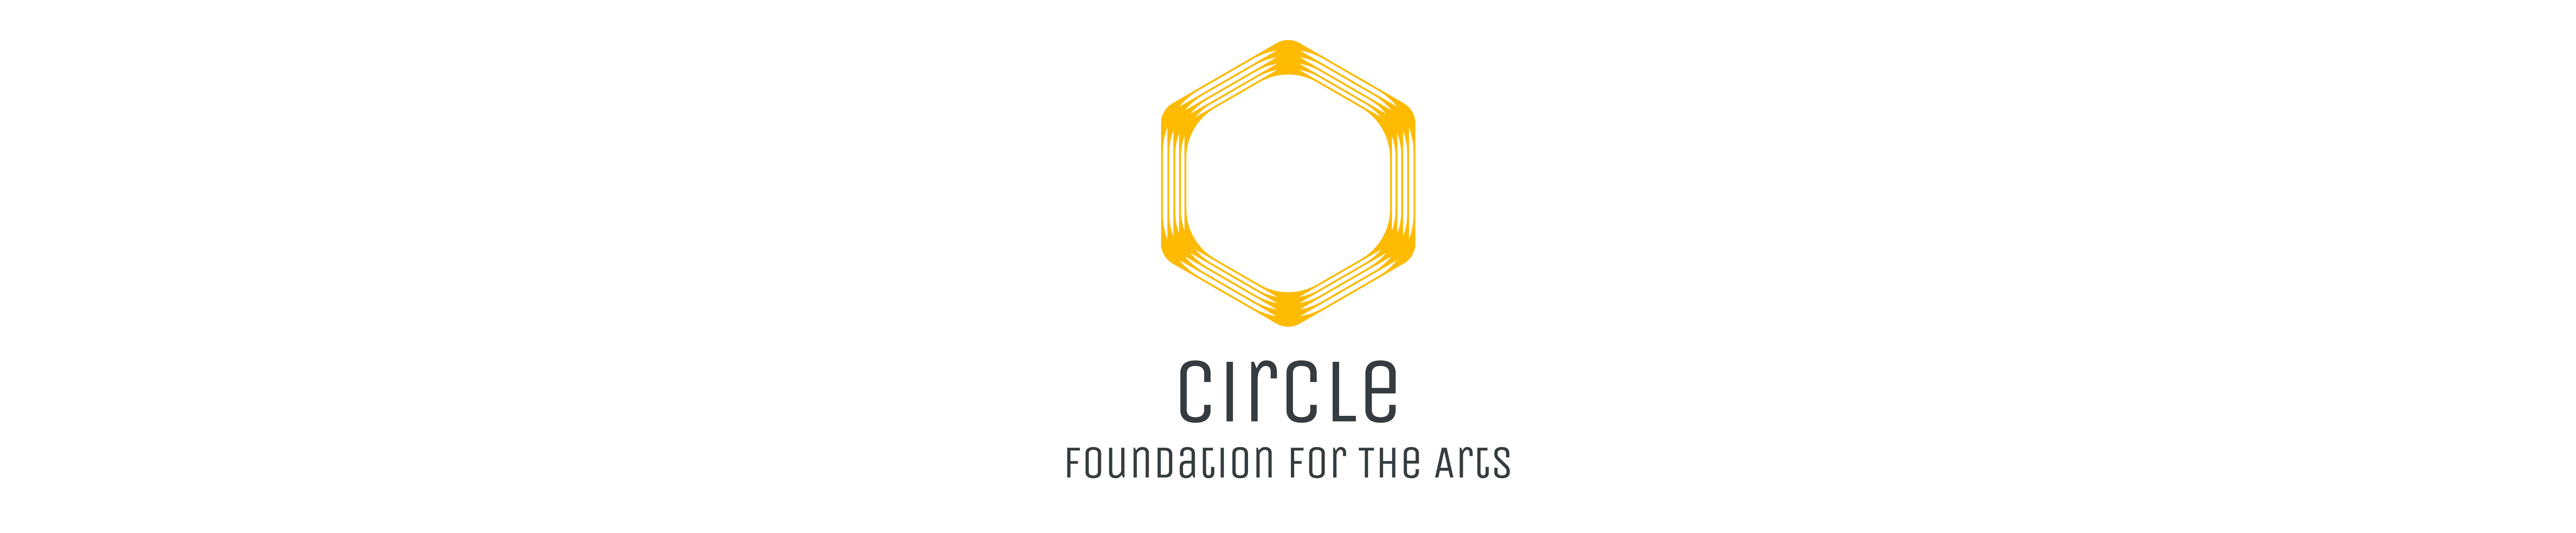 Circle Foundation for the Arts